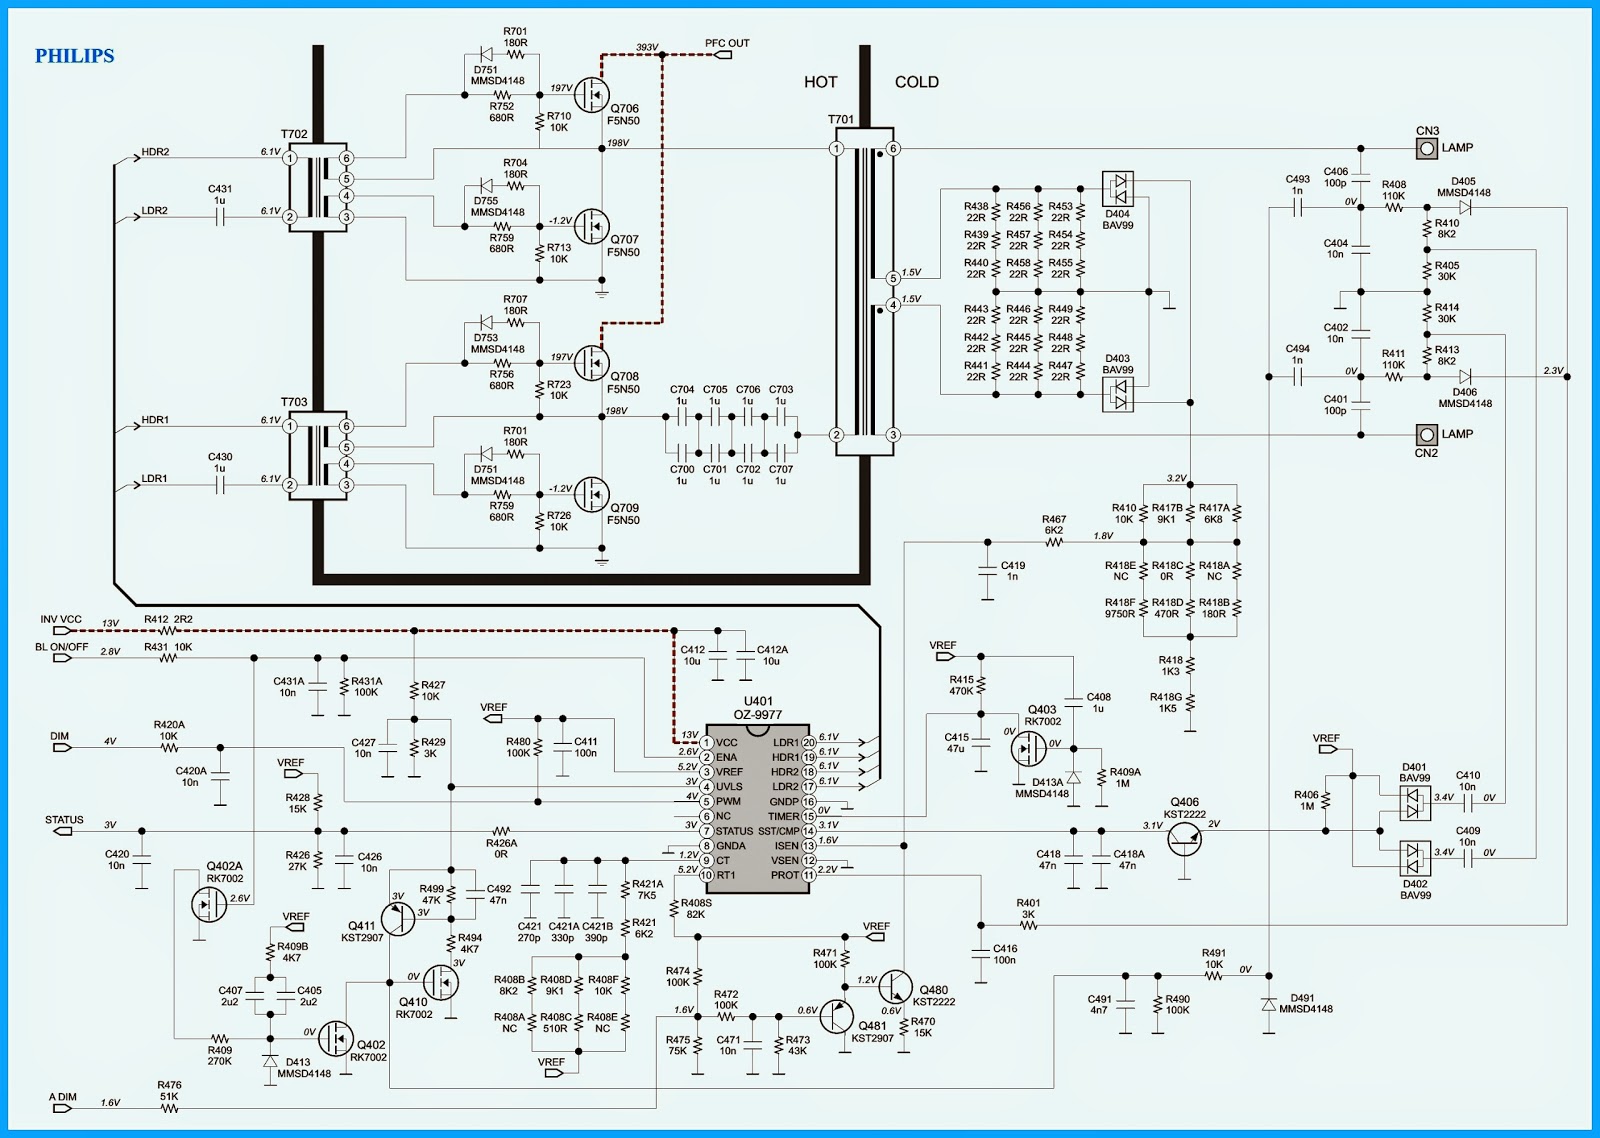 Electro help: PHILIPS 40PFL3606 - LCD TV - POWER SUPPLY SCHEMATIC